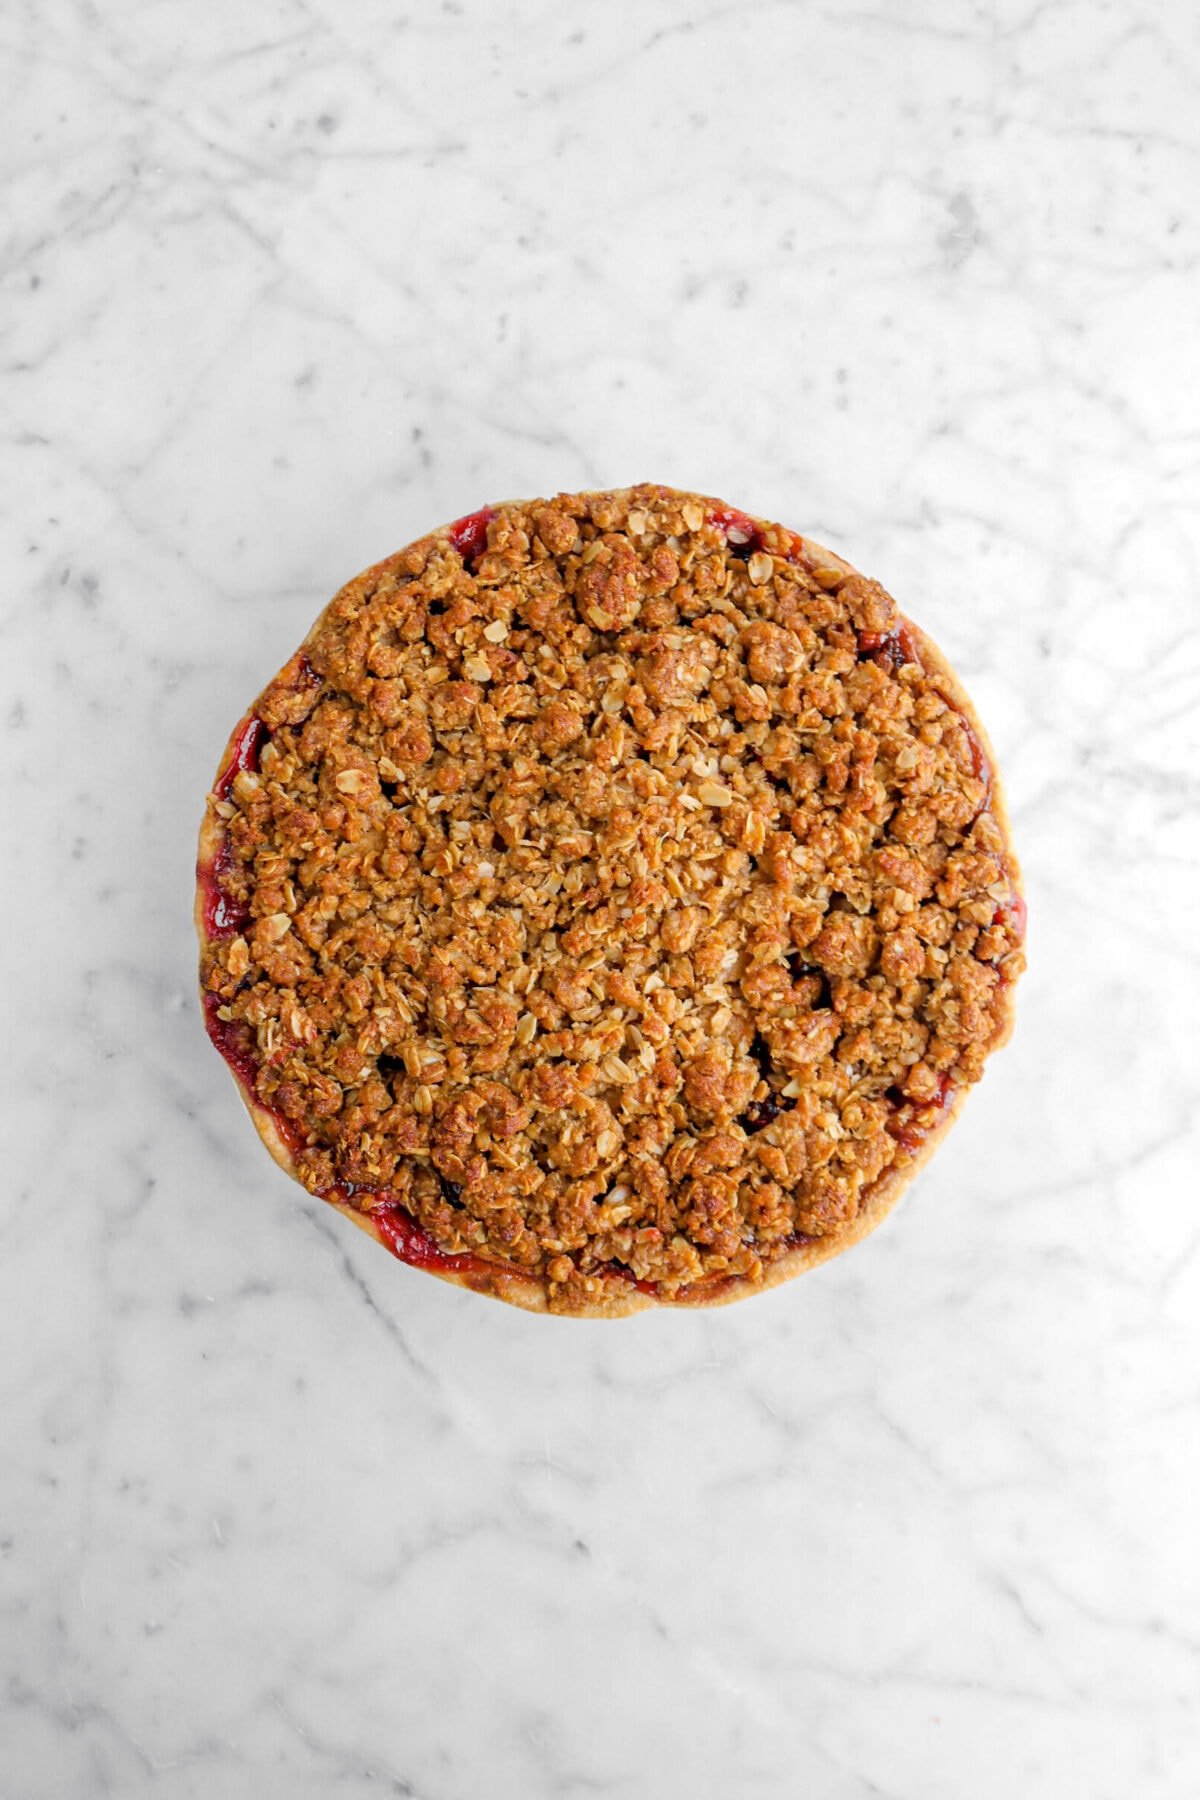 baked crumble pie on marble surface.